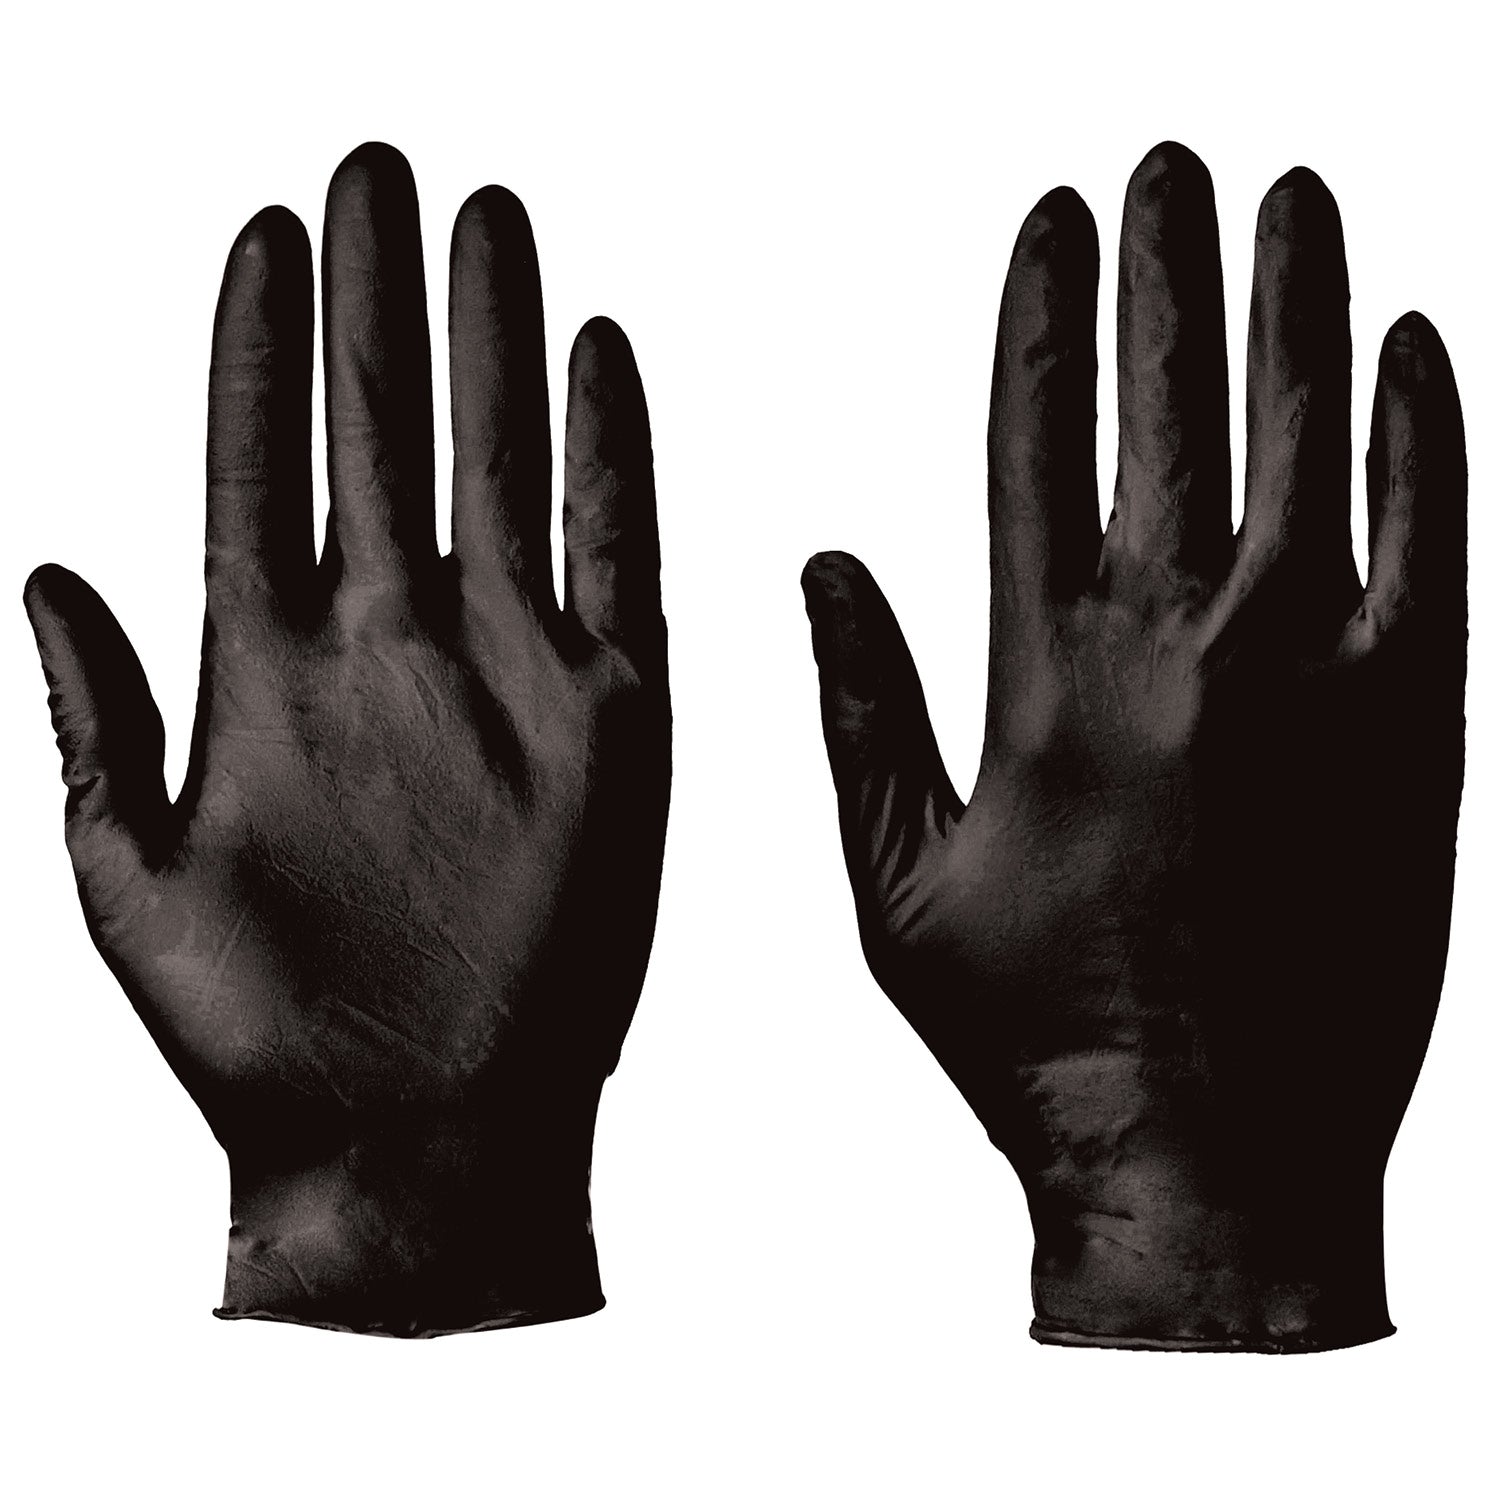 Supertouch Supertouch 5.5 Powderfree Nitrile Gloves - D83